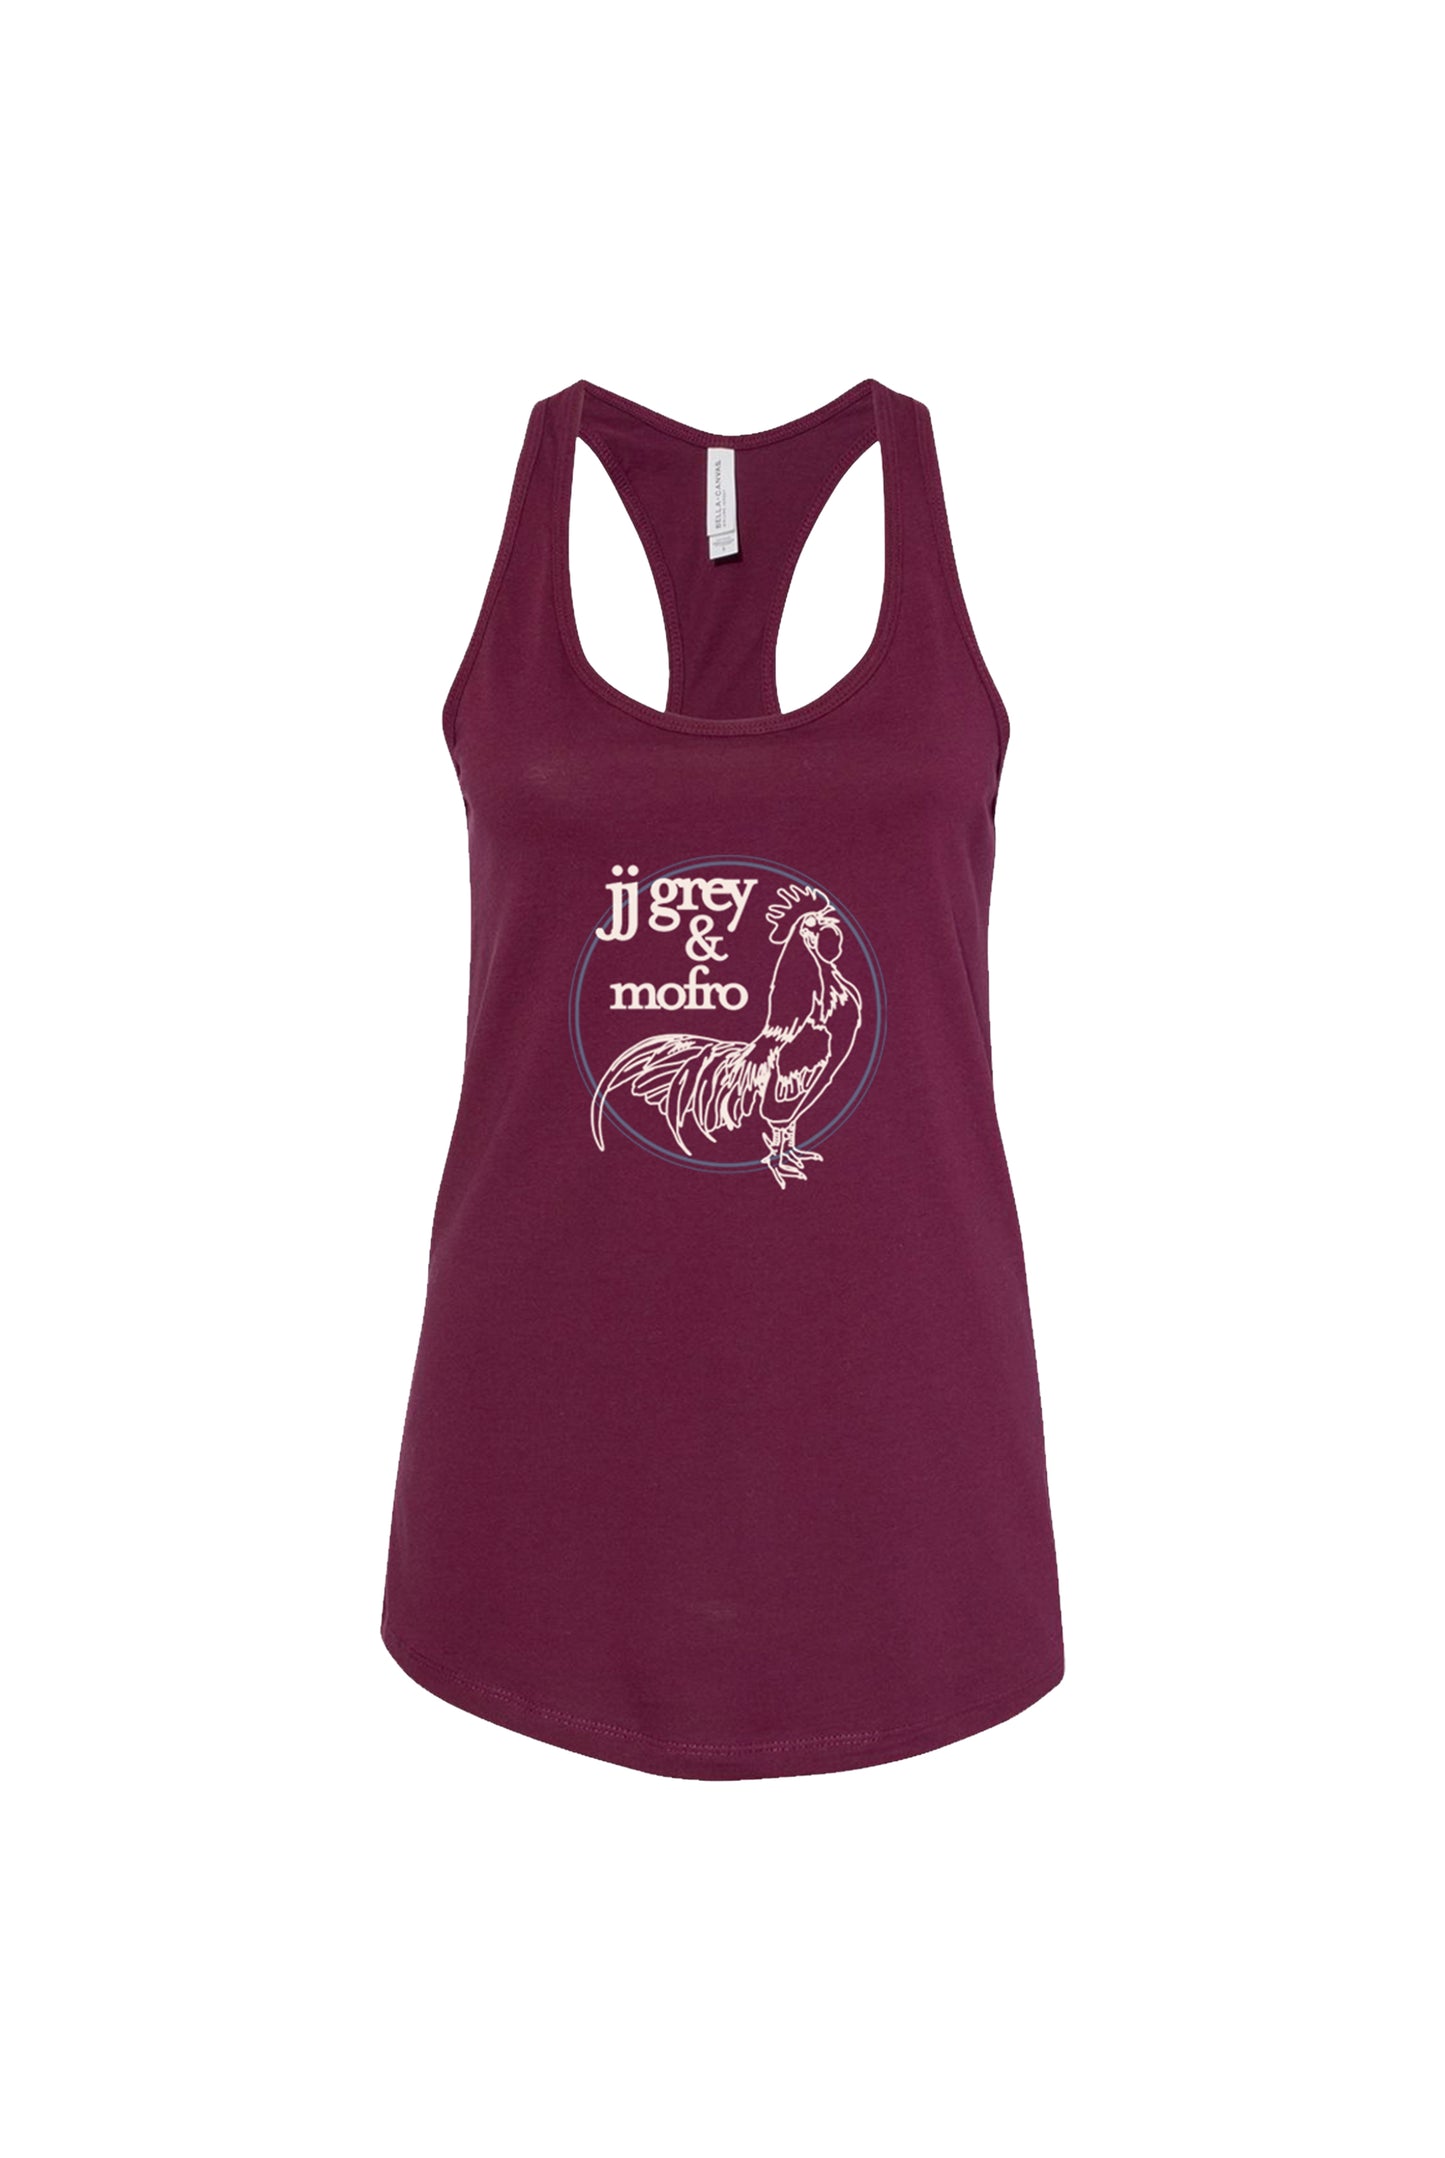 Circle Rooster Women's Tank